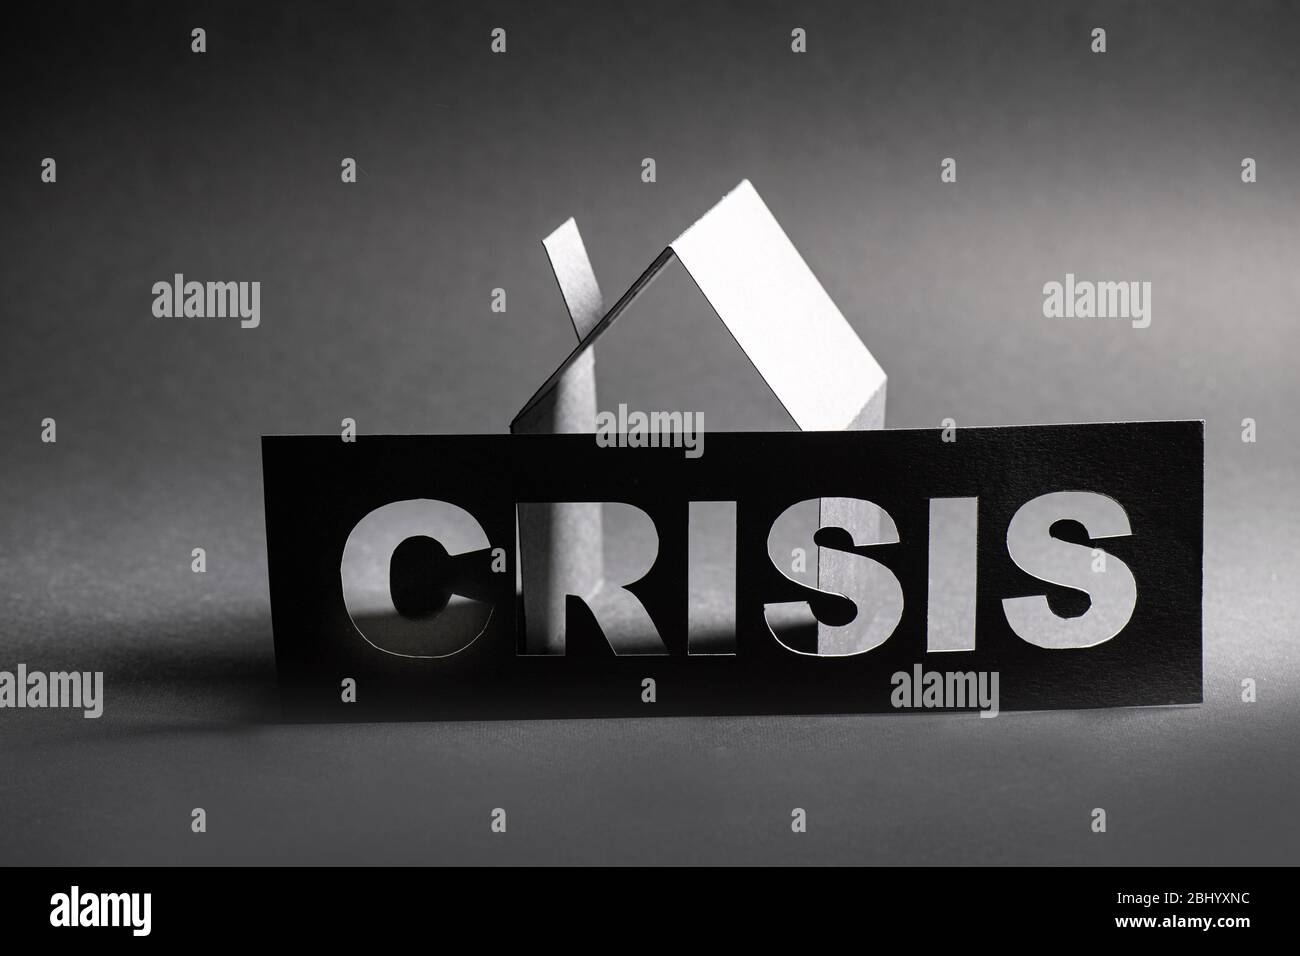 Crisis sign with cut out letters in front of cardboard house shape Stock Photo